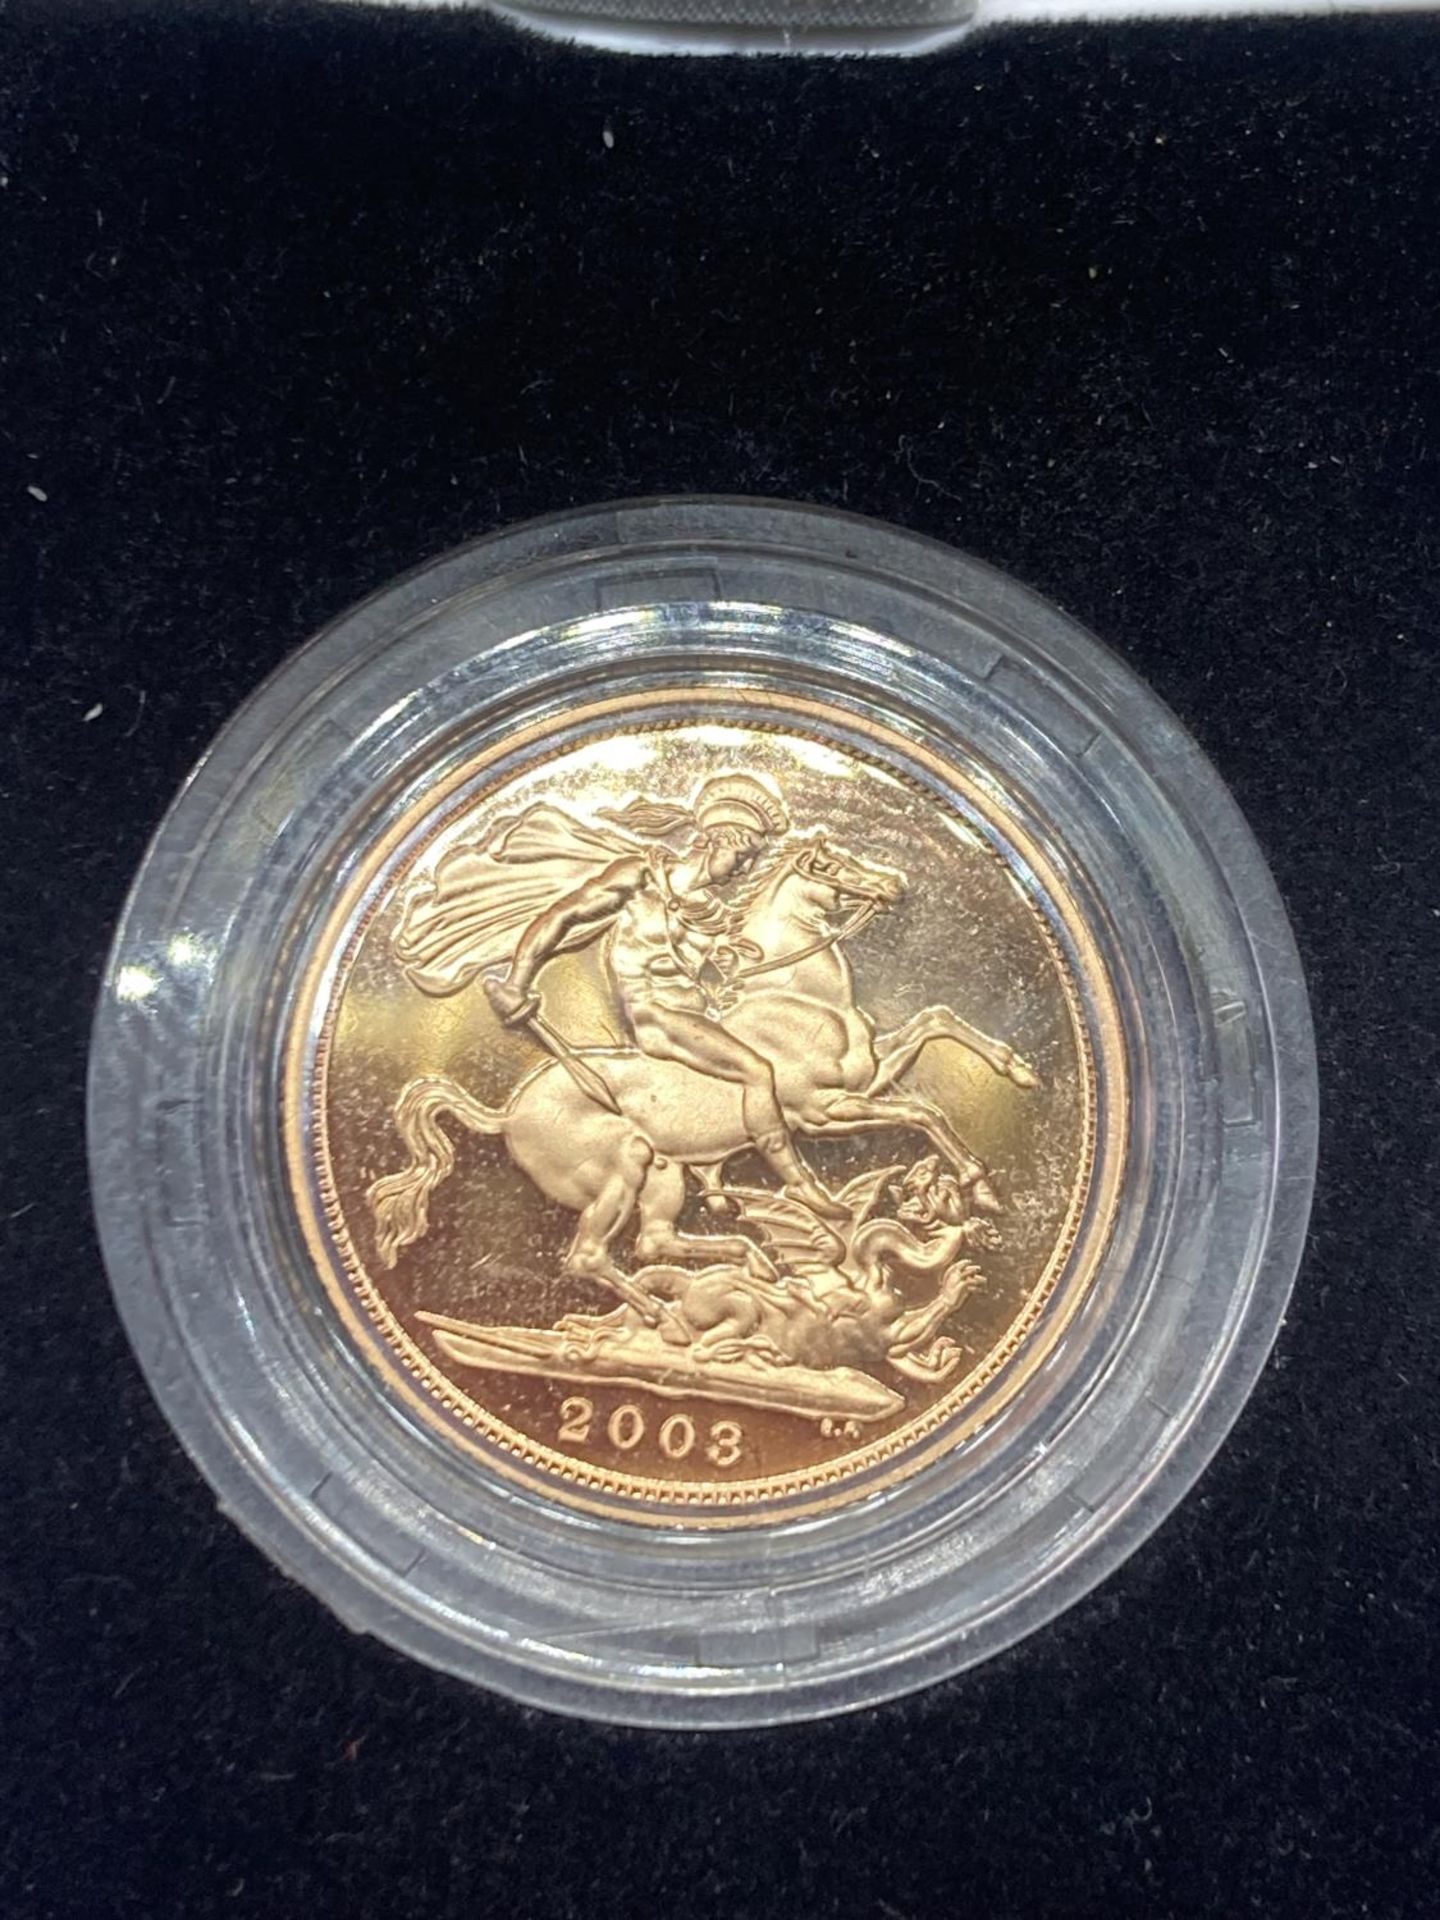 A 2003 GOLD PROOF SOVEREIGN QUEEN ELIZABETH II NO 09985 OF 15,000 IN A PRESENTATION BOX WITH - Image 2 of 5